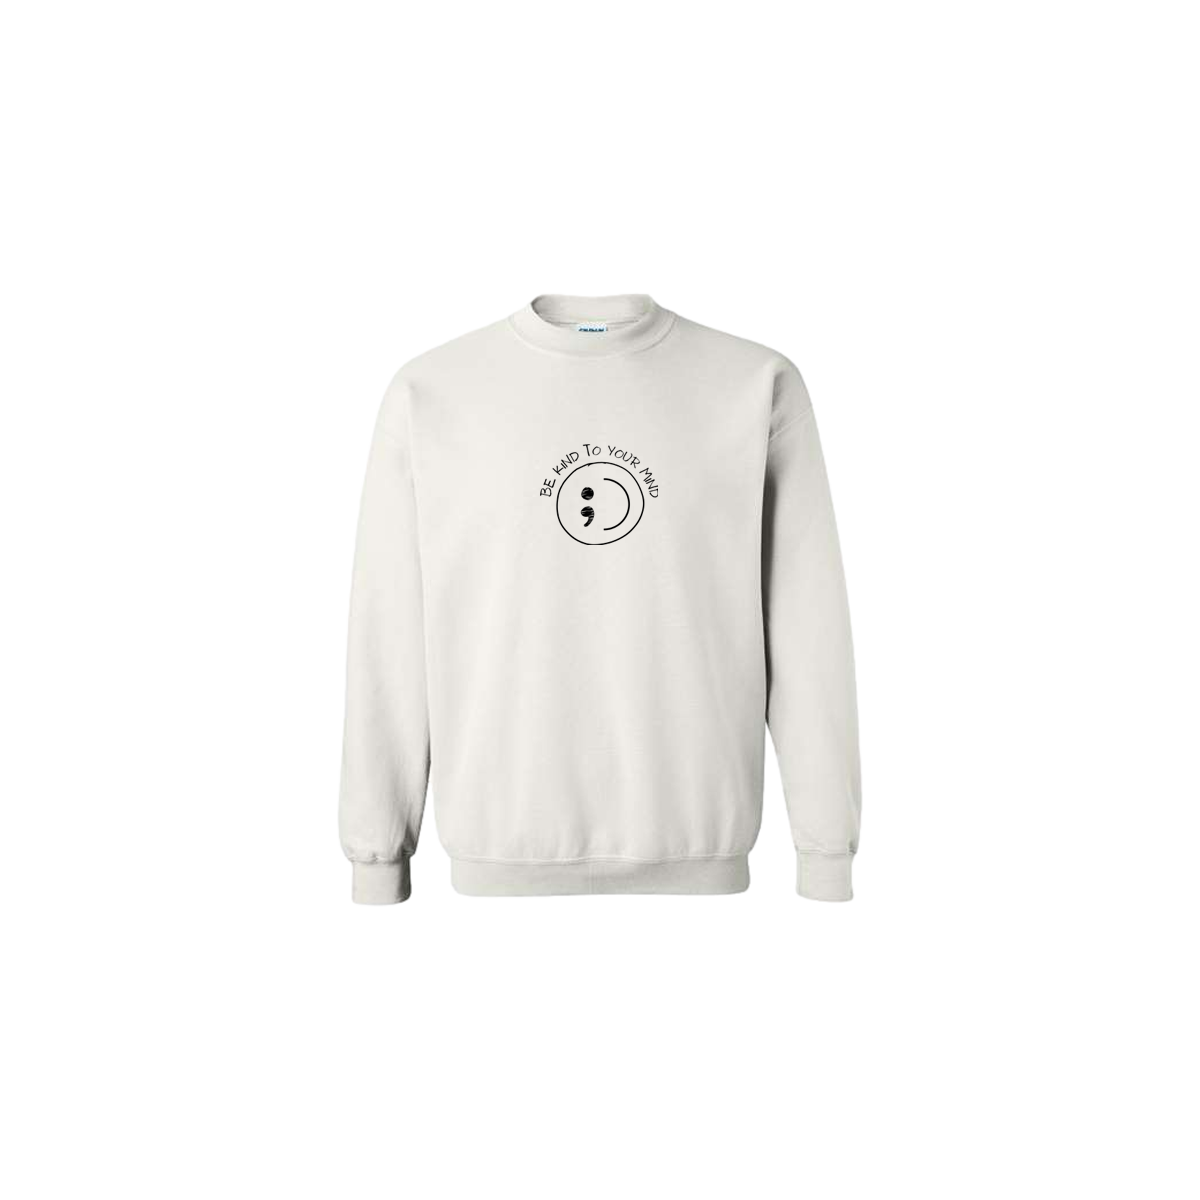 Be Kind To Your Mind Smiley Face Embroidered White Crewneck - Mental Health Awareness Clothing